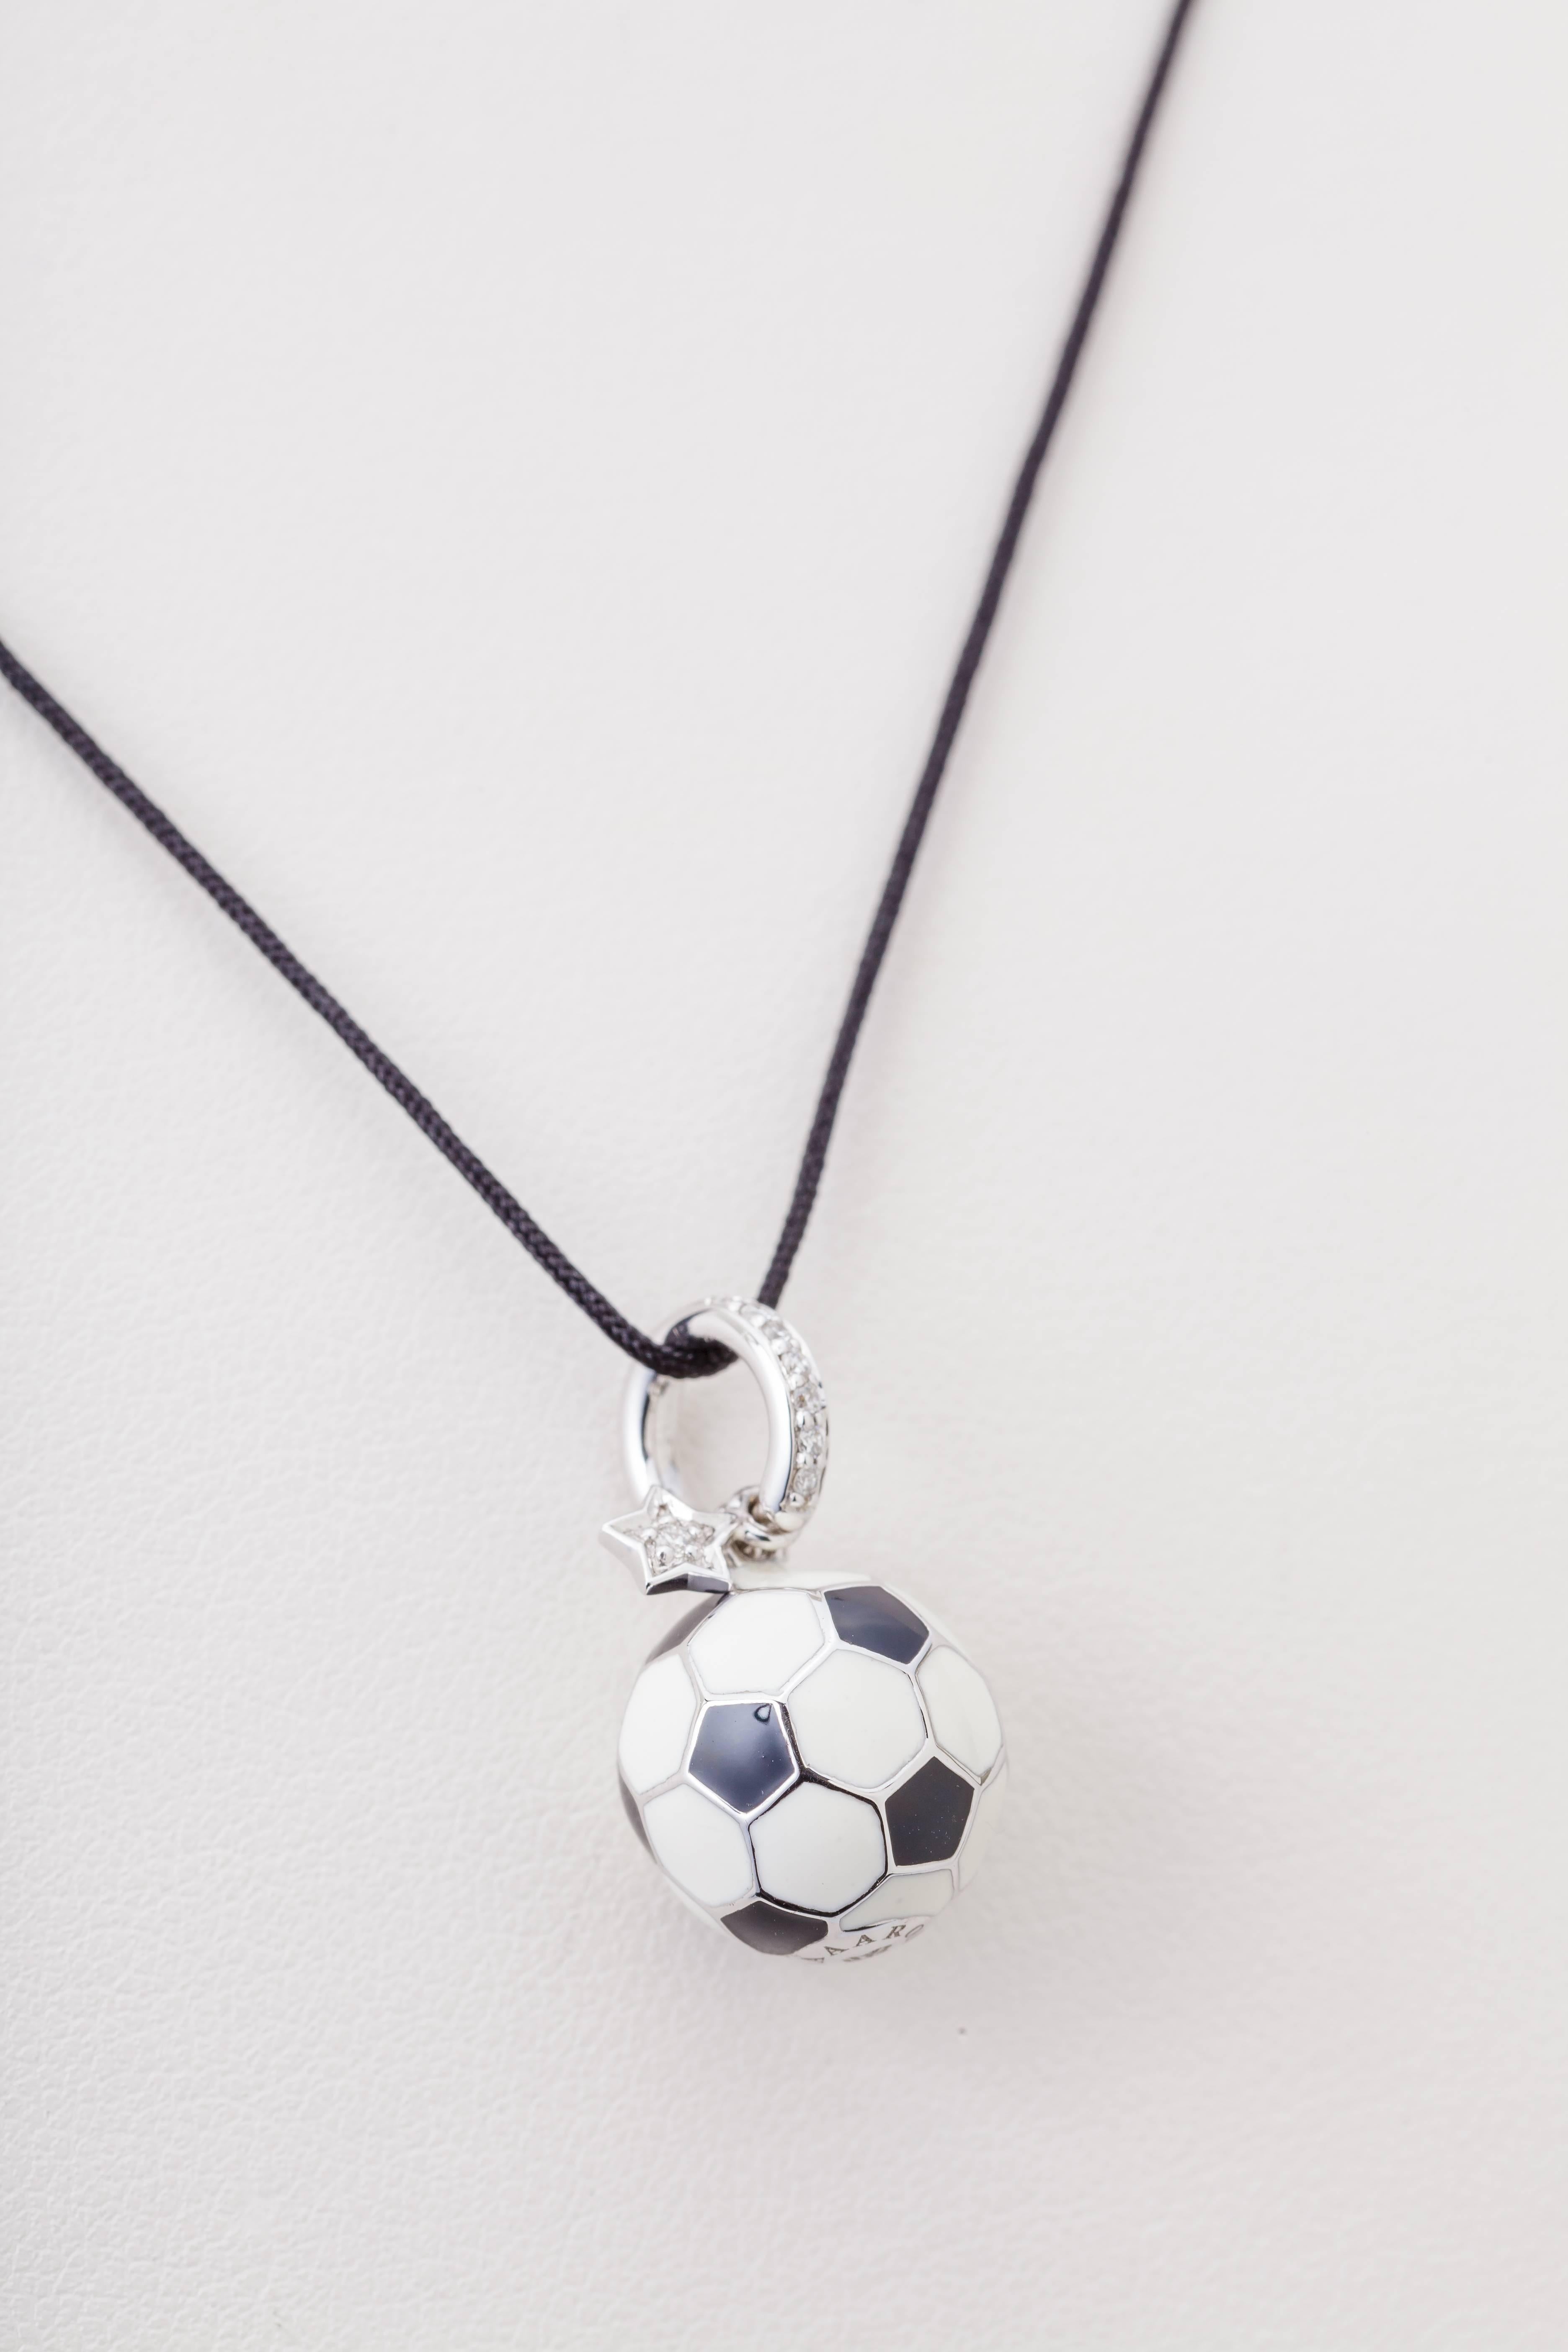 This 18k white gold Aaron Basha soccer ball dangle charm has white and black enamel and is set with diamonds totaling 0.11ct.